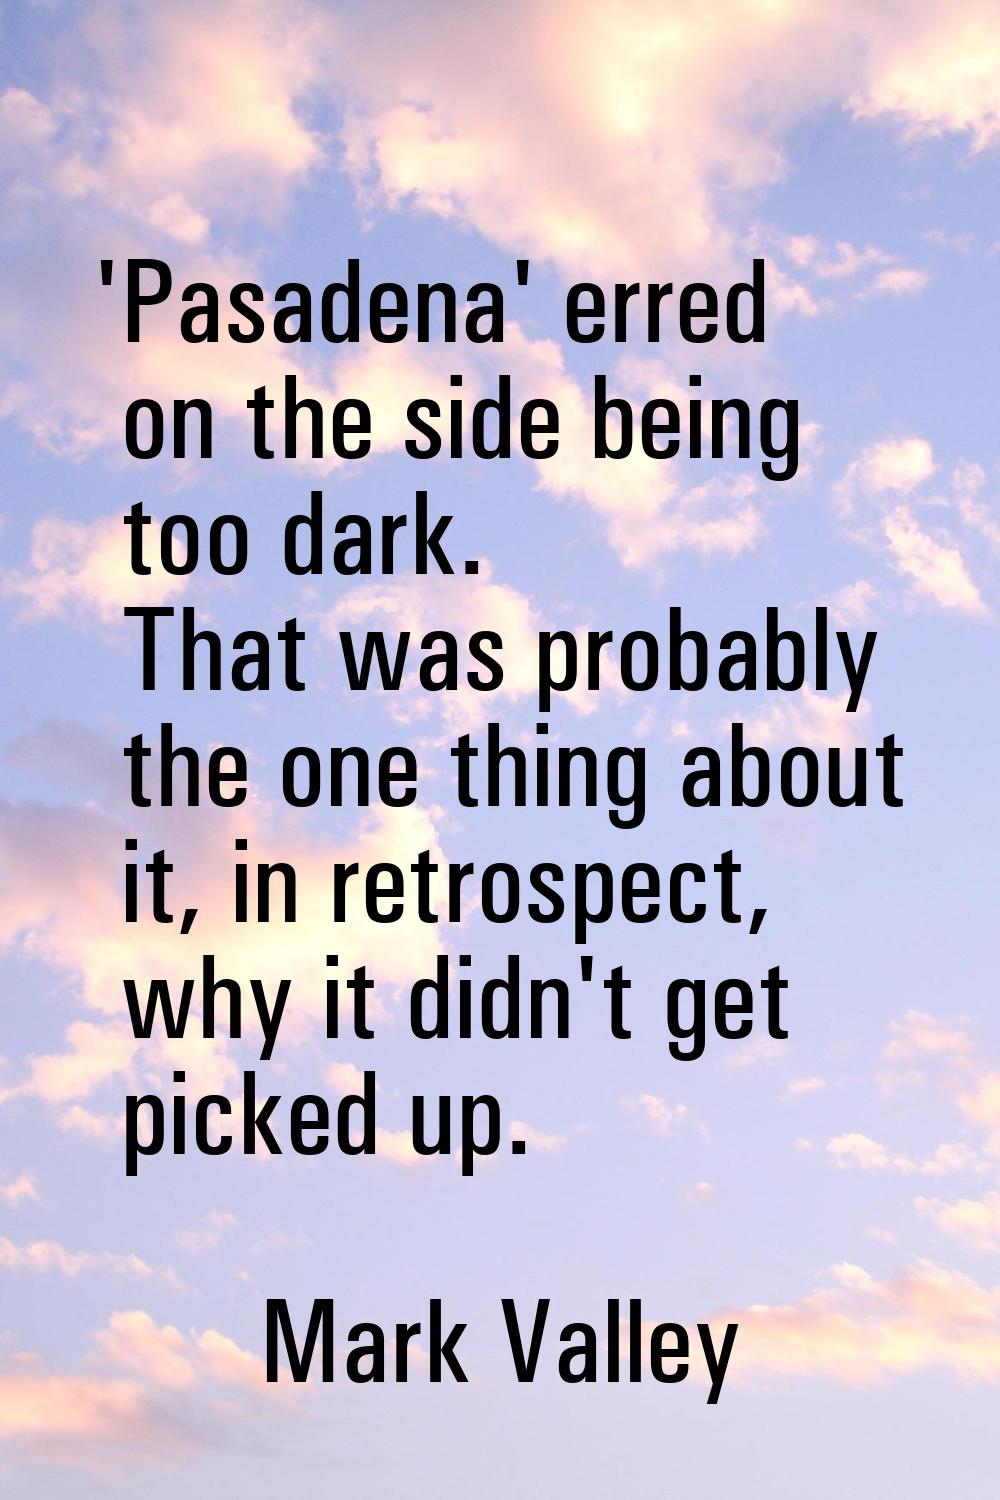 'Pasadena' erred on the side being too dark. That was probably the one thing about it, in retrospec